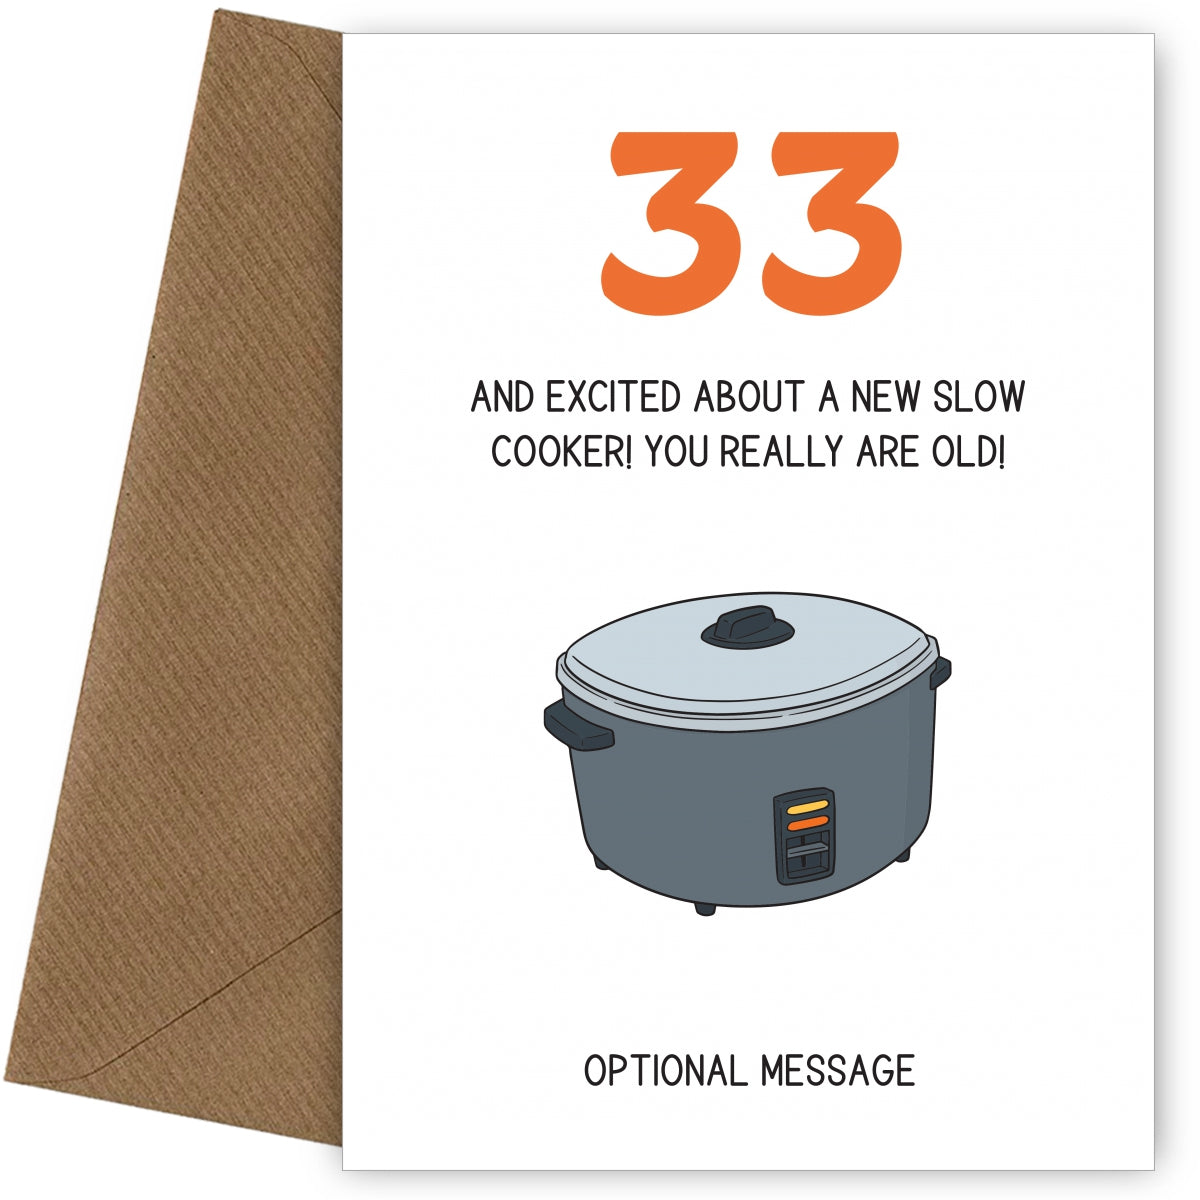 Happy 33rd Birthday Card - Excited About a Slow Cooker!